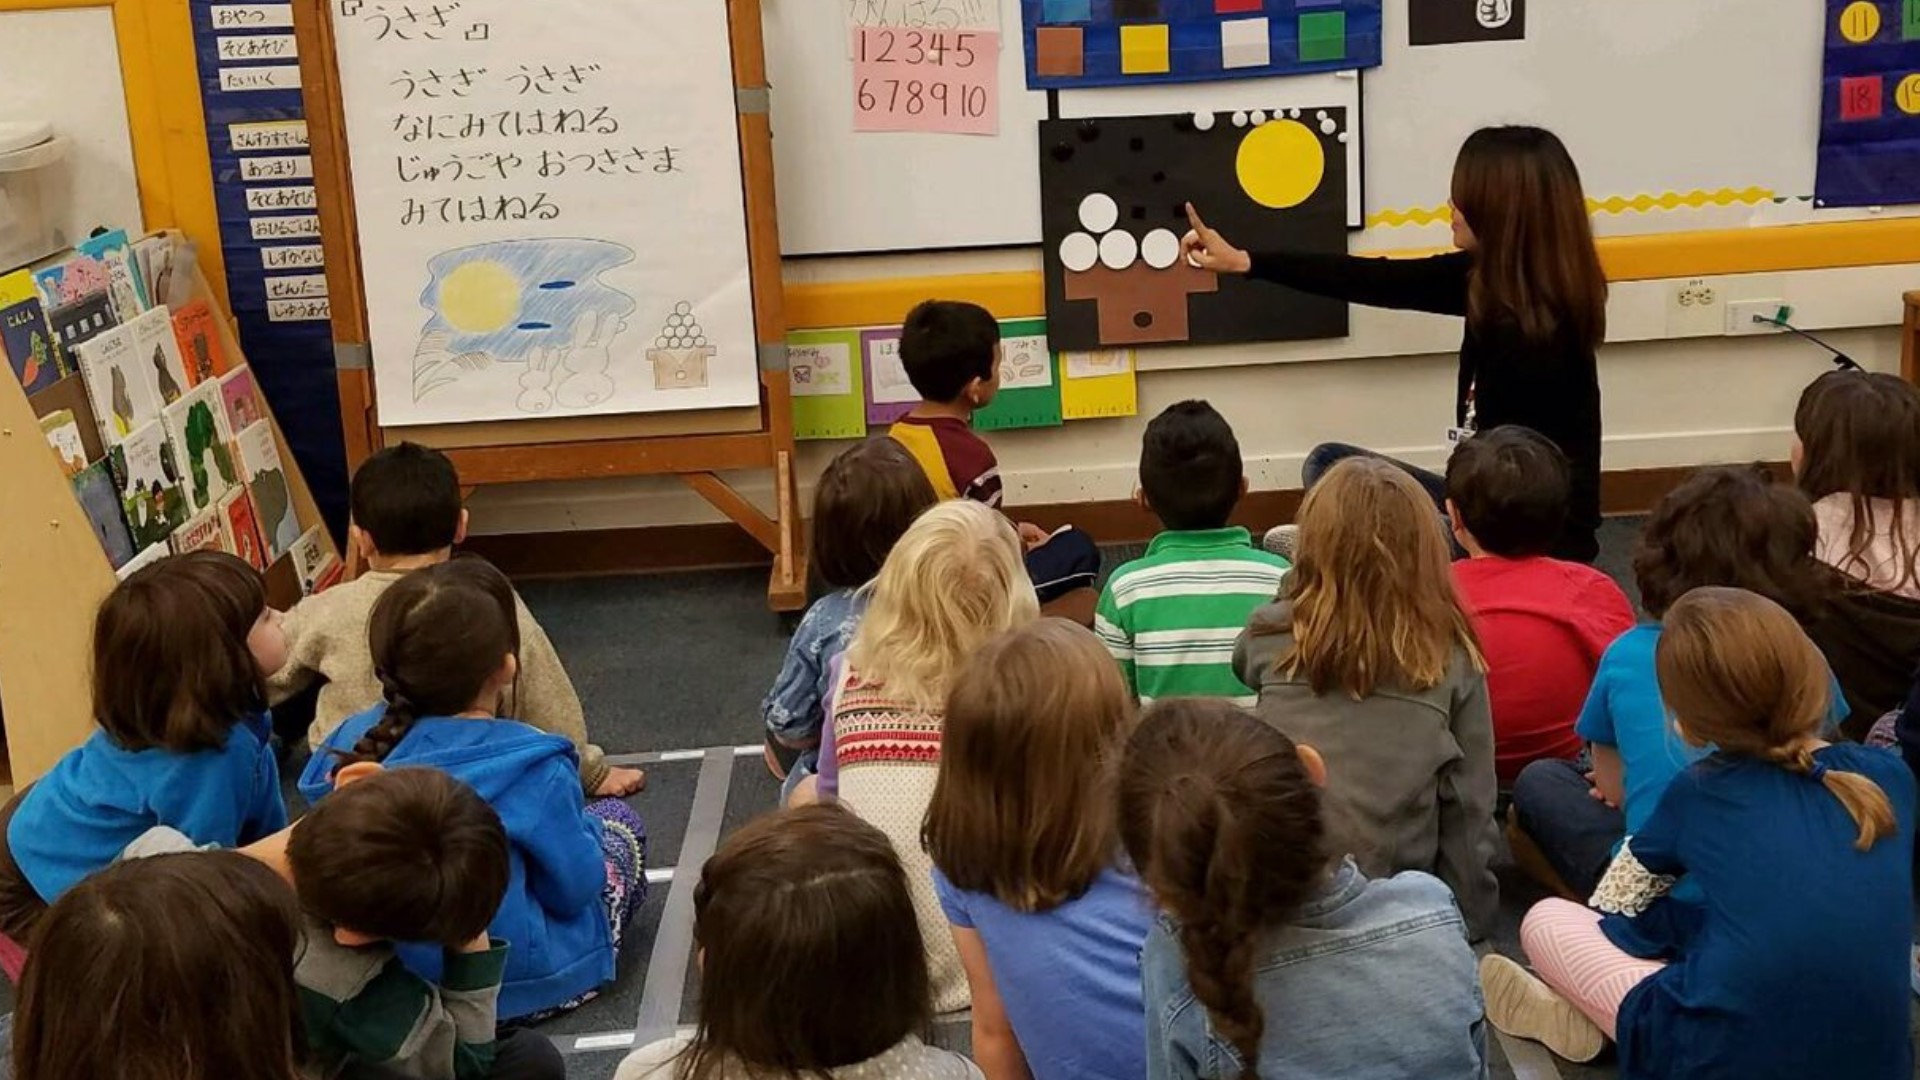 A Japanese dual language immersion program offered through Portland Public Schools got its start in 1989 at Richmond Elementary and continues today at the school.